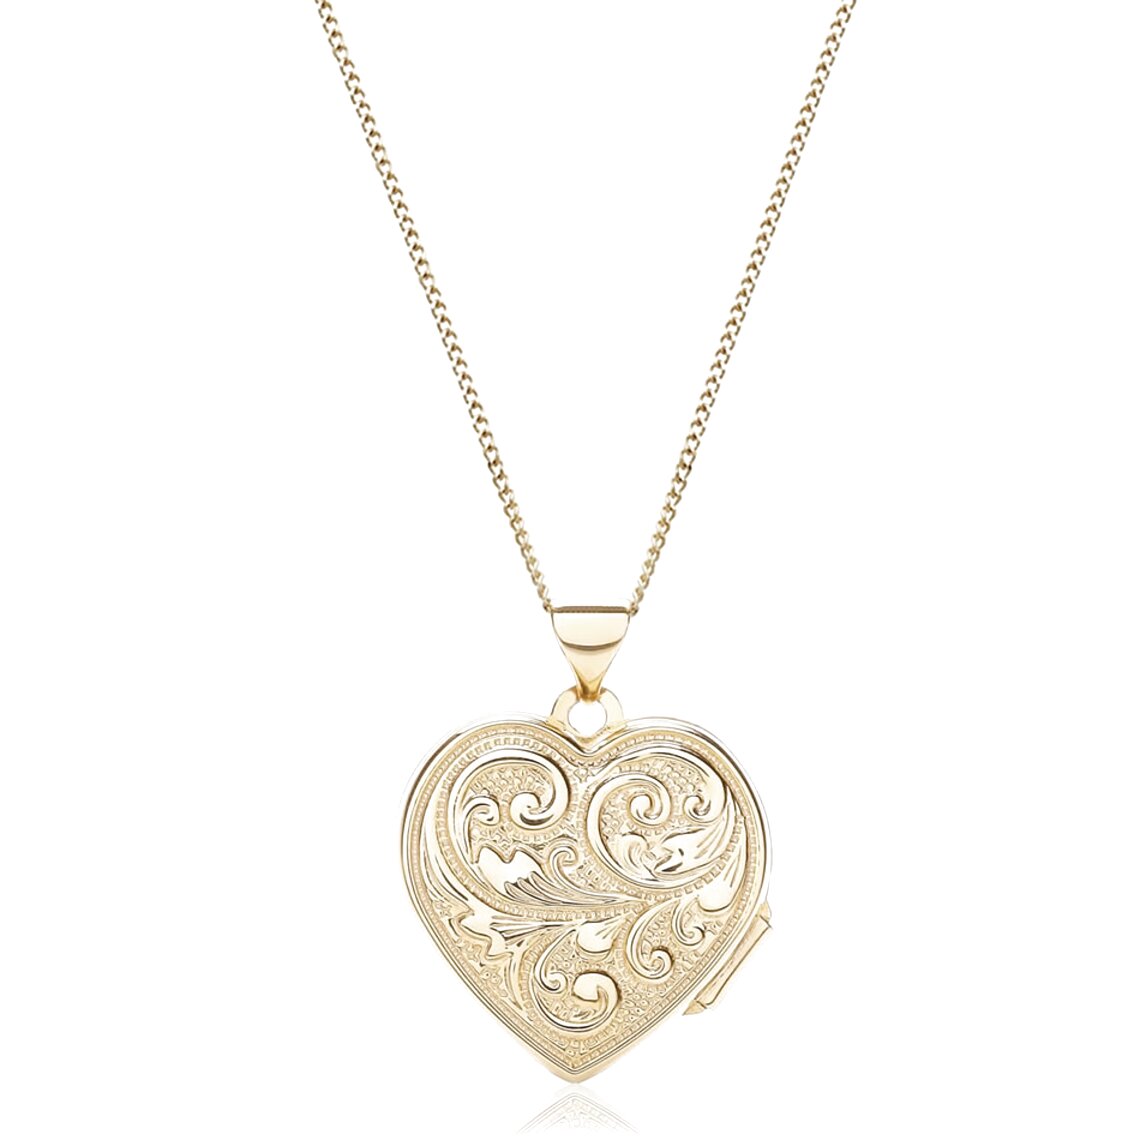 9Ct Gold Locket for sale in UK | 78 used 9Ct Gold Lockets